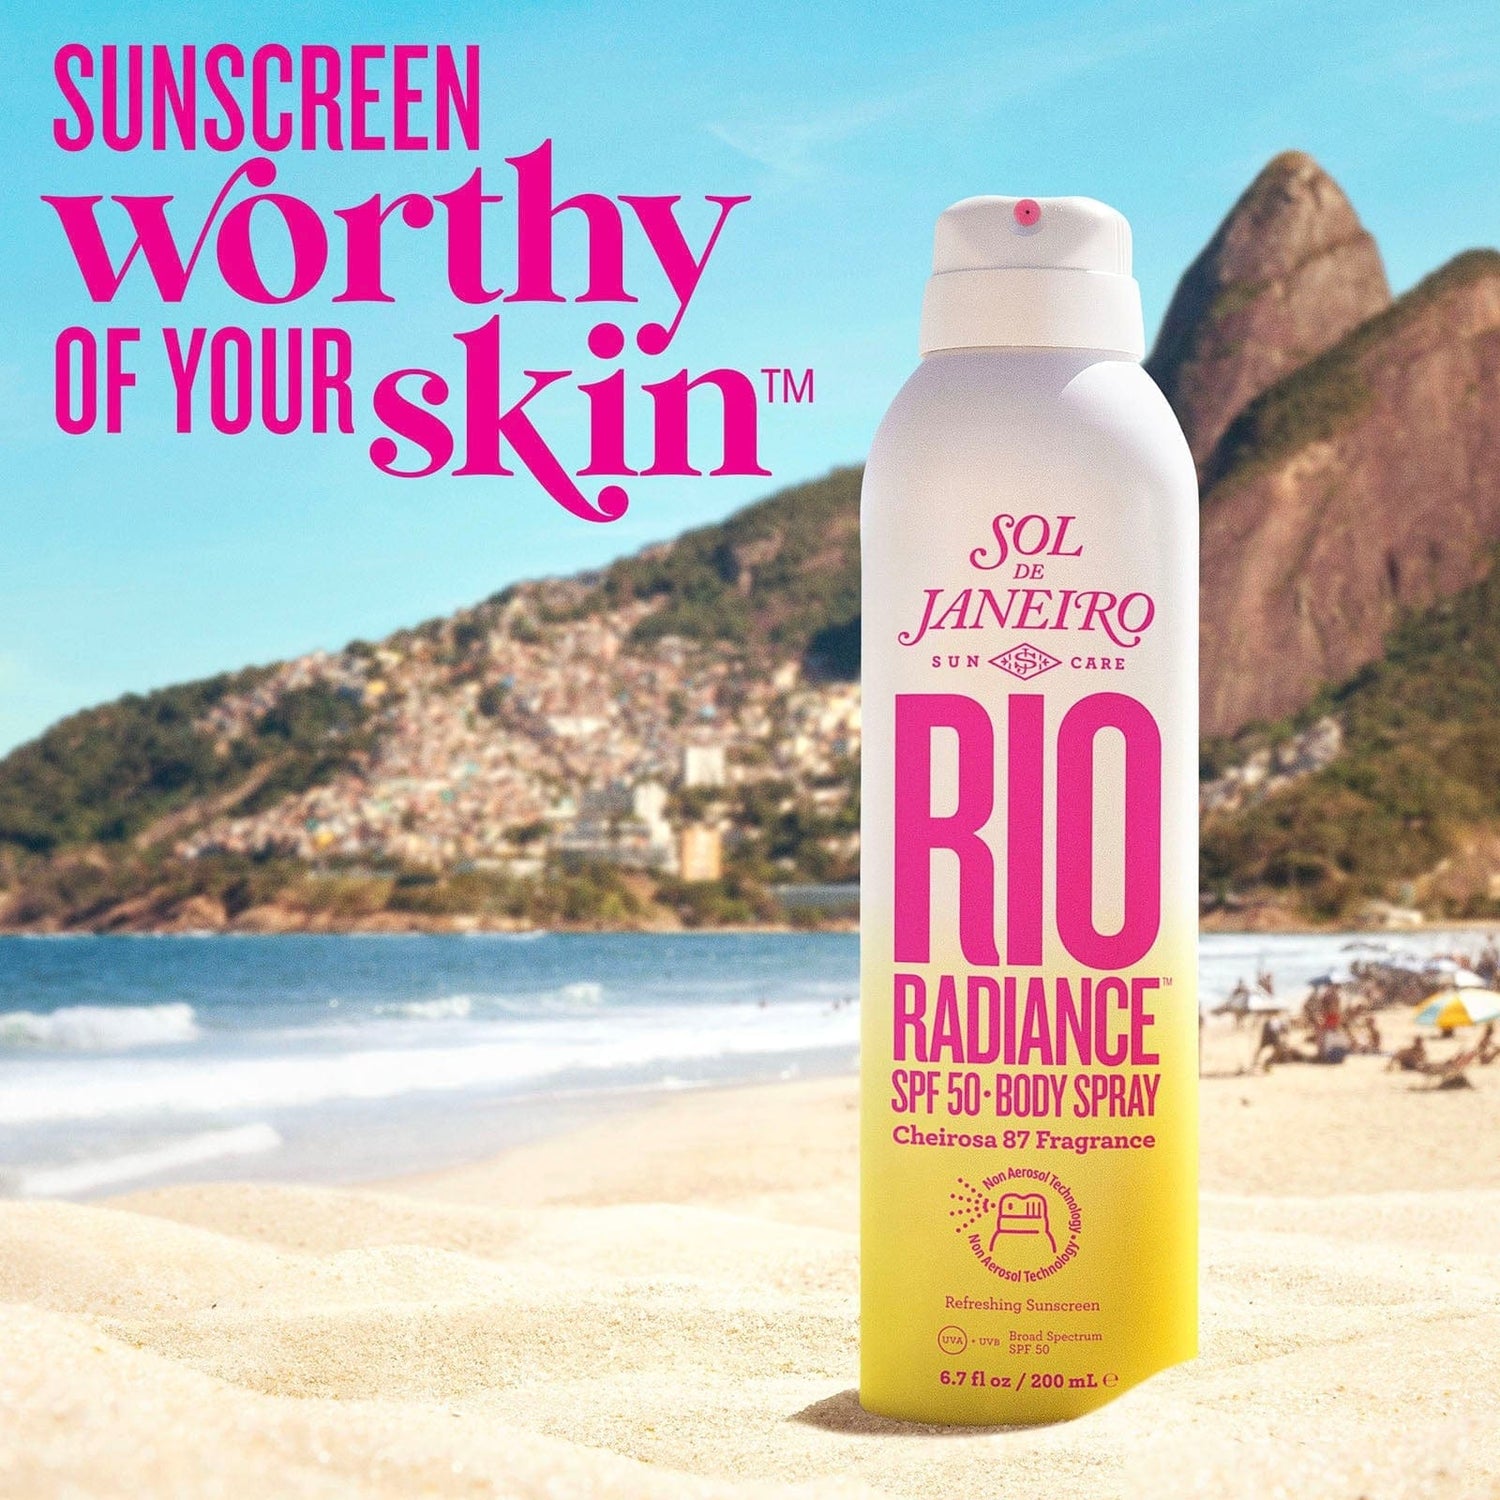 Sunscreen worthy of your skin.